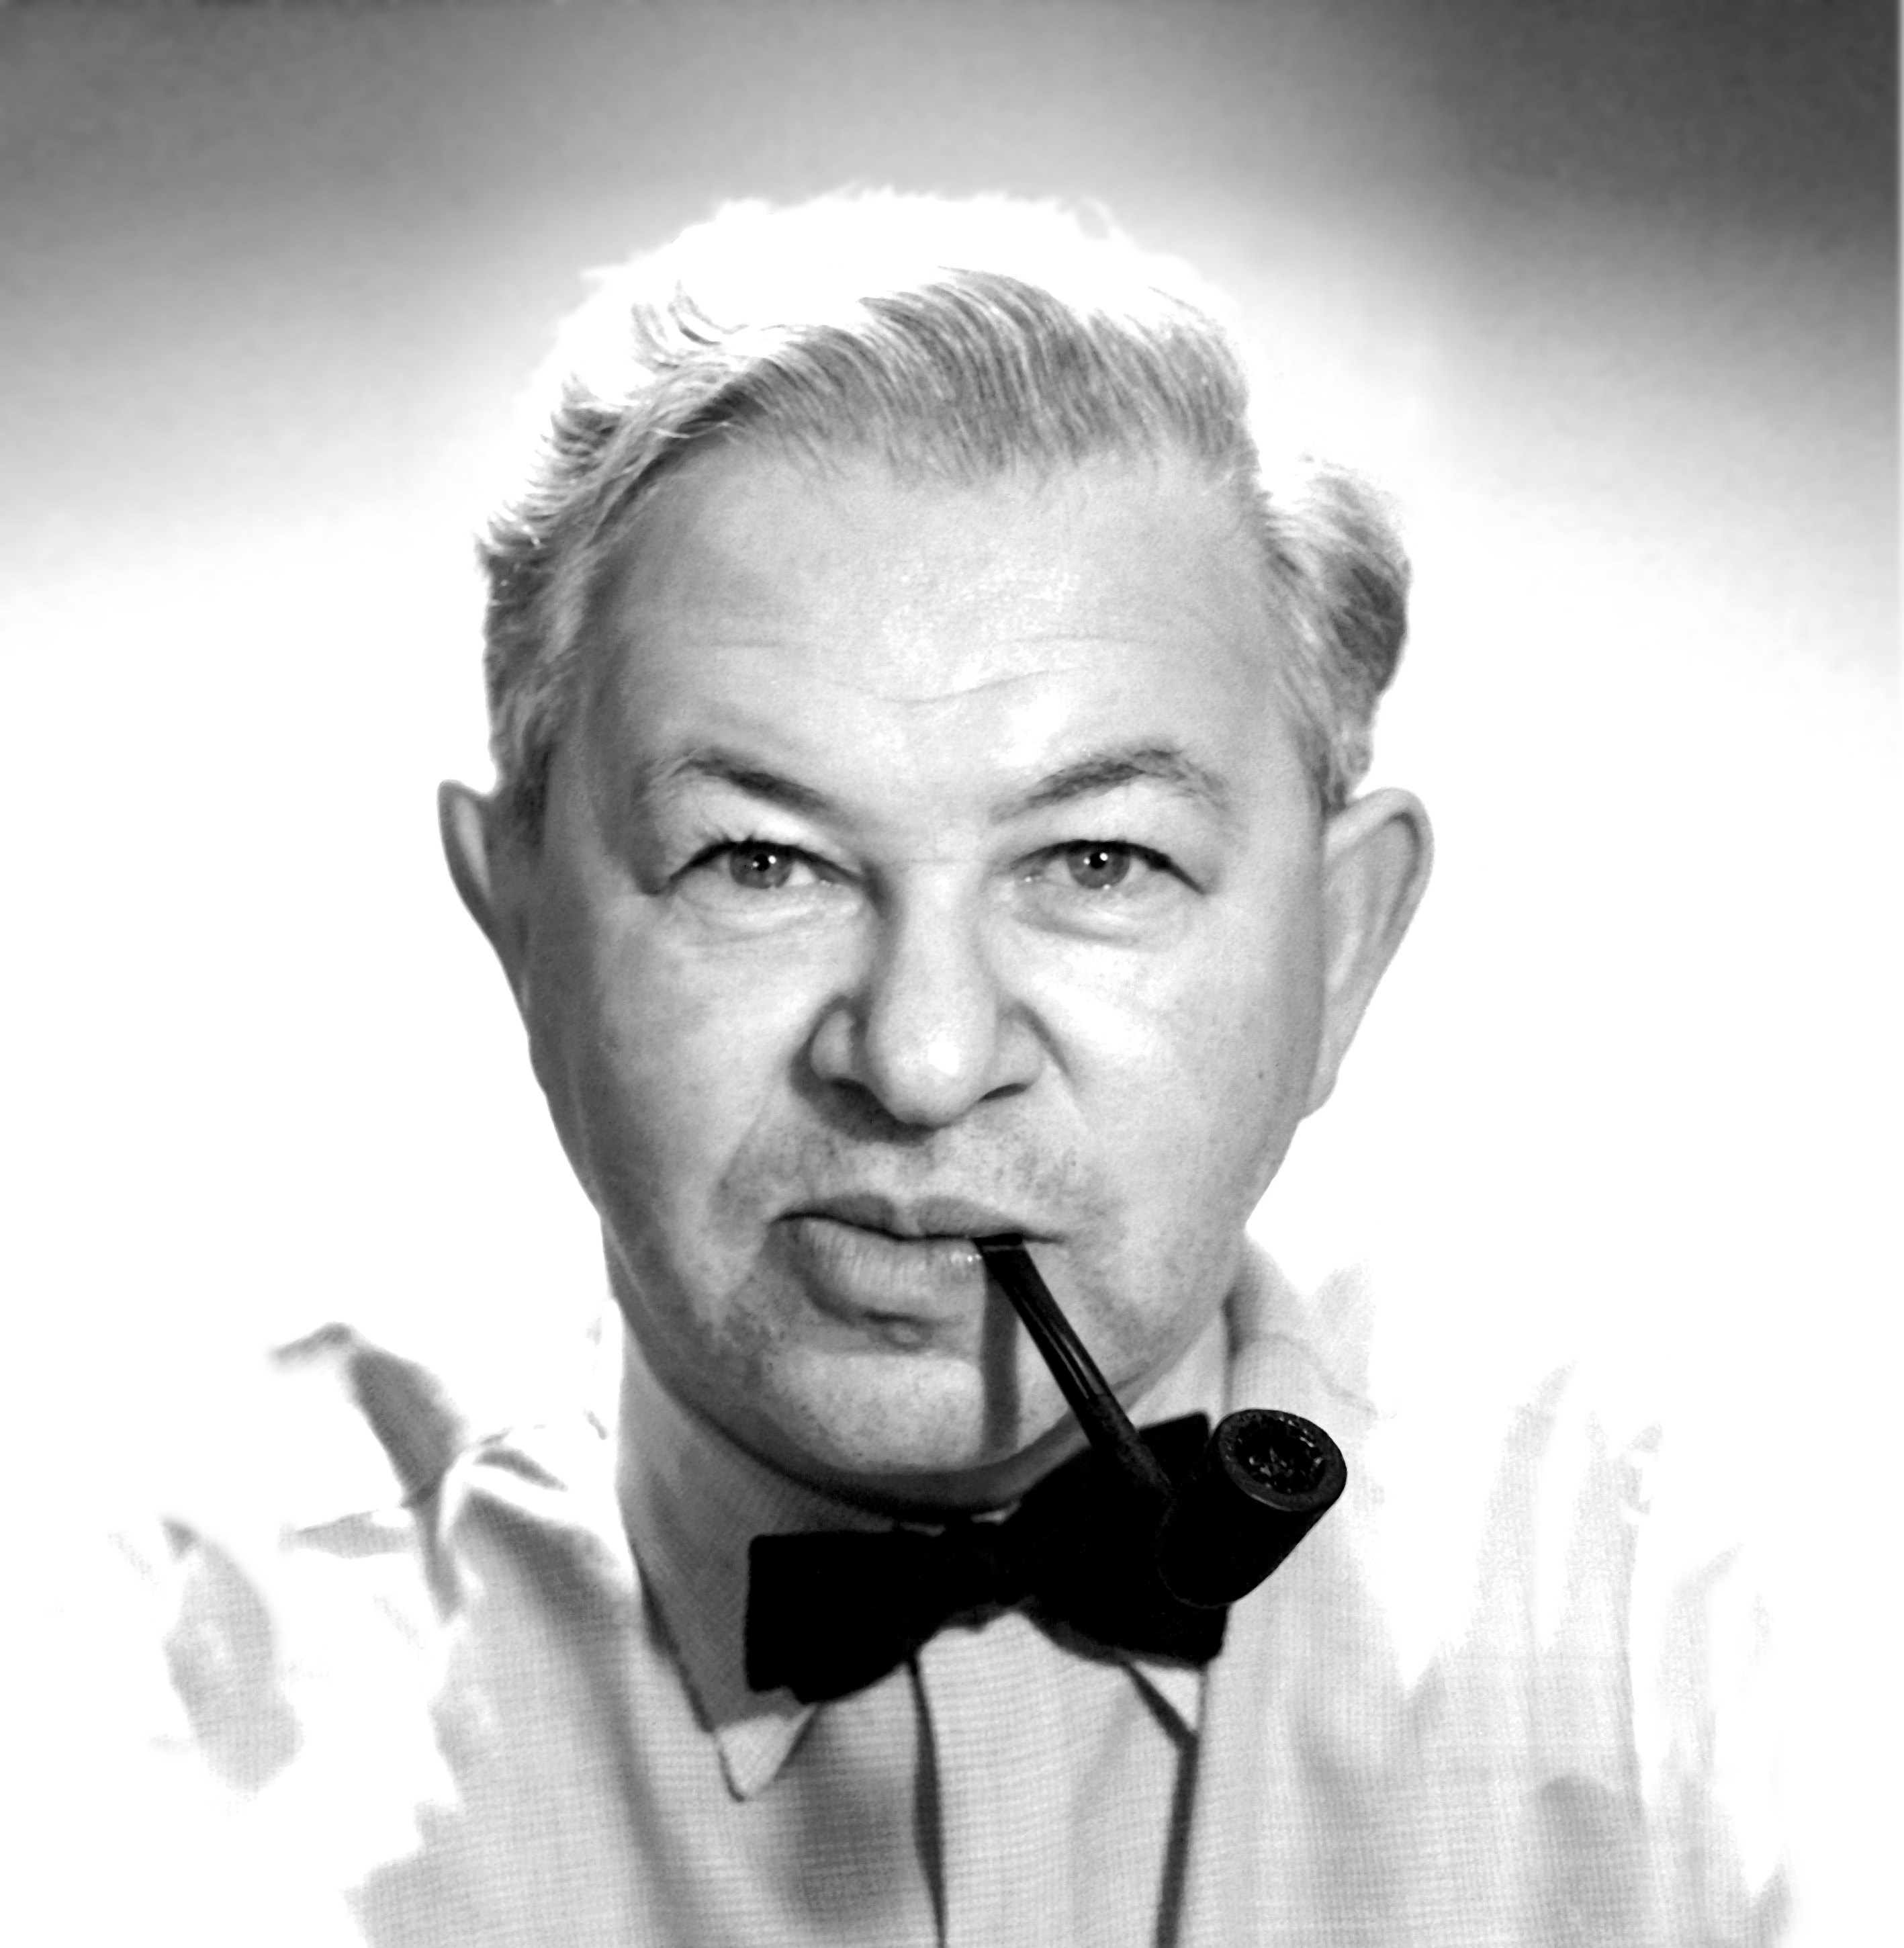 Portrait photo of Arne Jacobsen with a pipe in his mouth